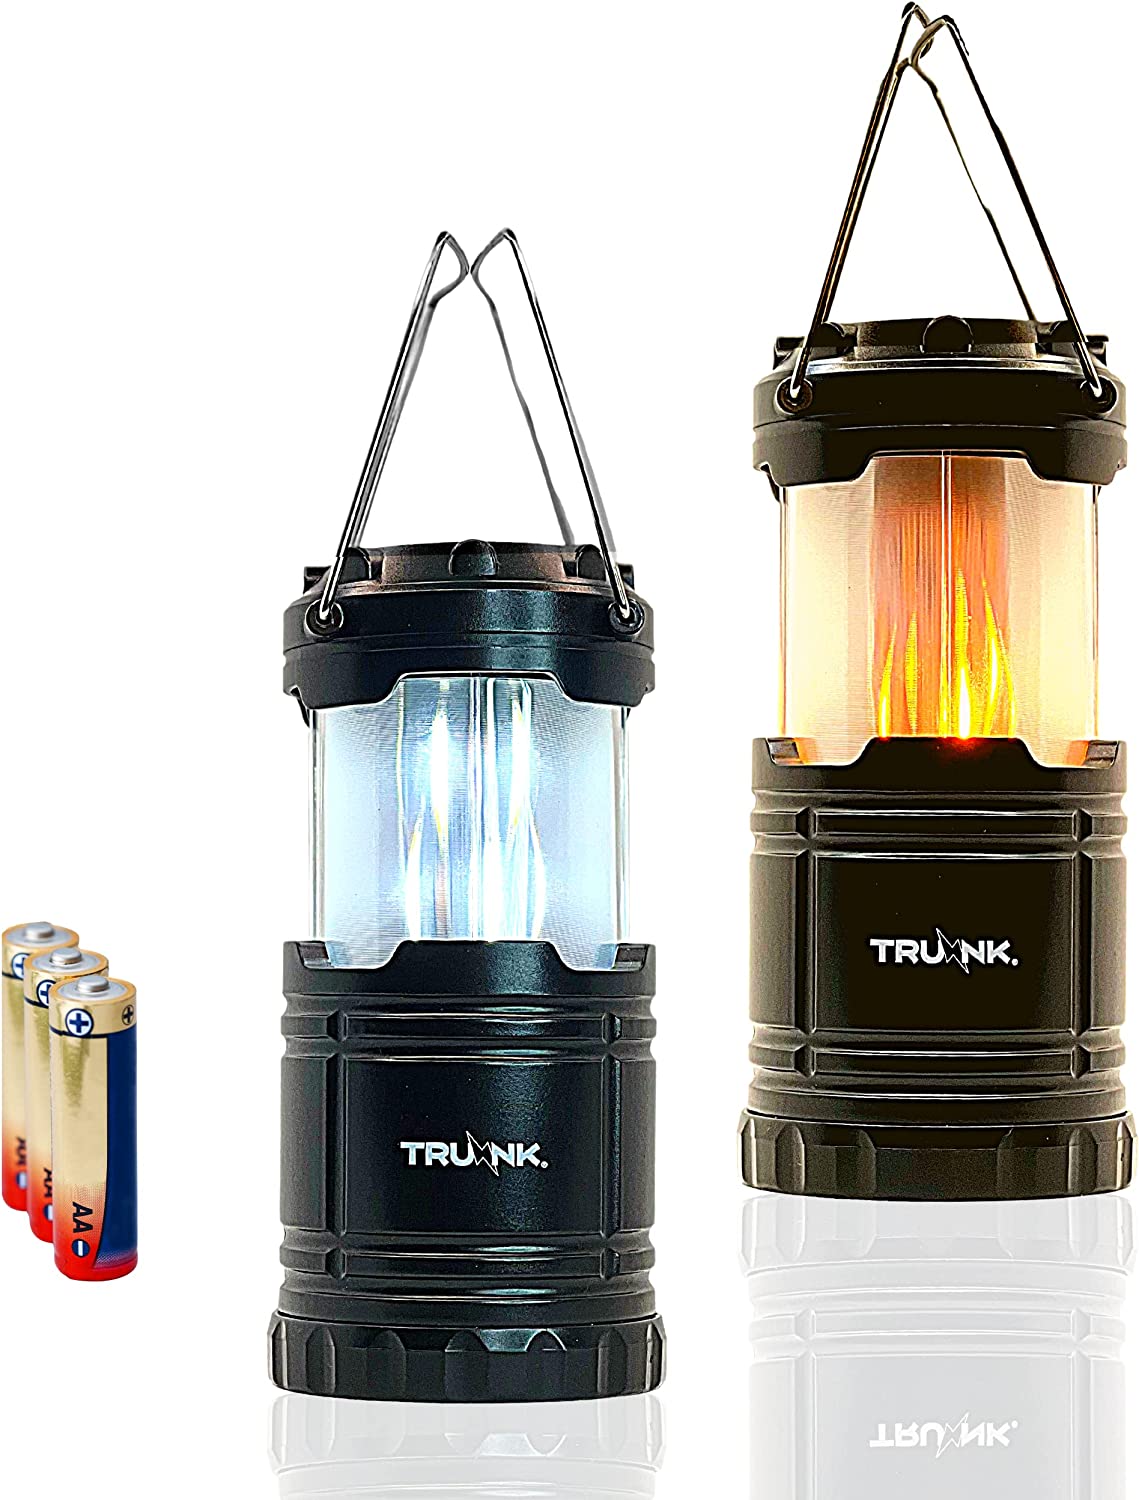 Truhnk Dual Mode Portable Led Camping Lantern-Super Bright White and Flame Light. Ideal for Emergencies, Storms, Hurricanes and Power Outages. Candle Light Effect (Pack of 1)